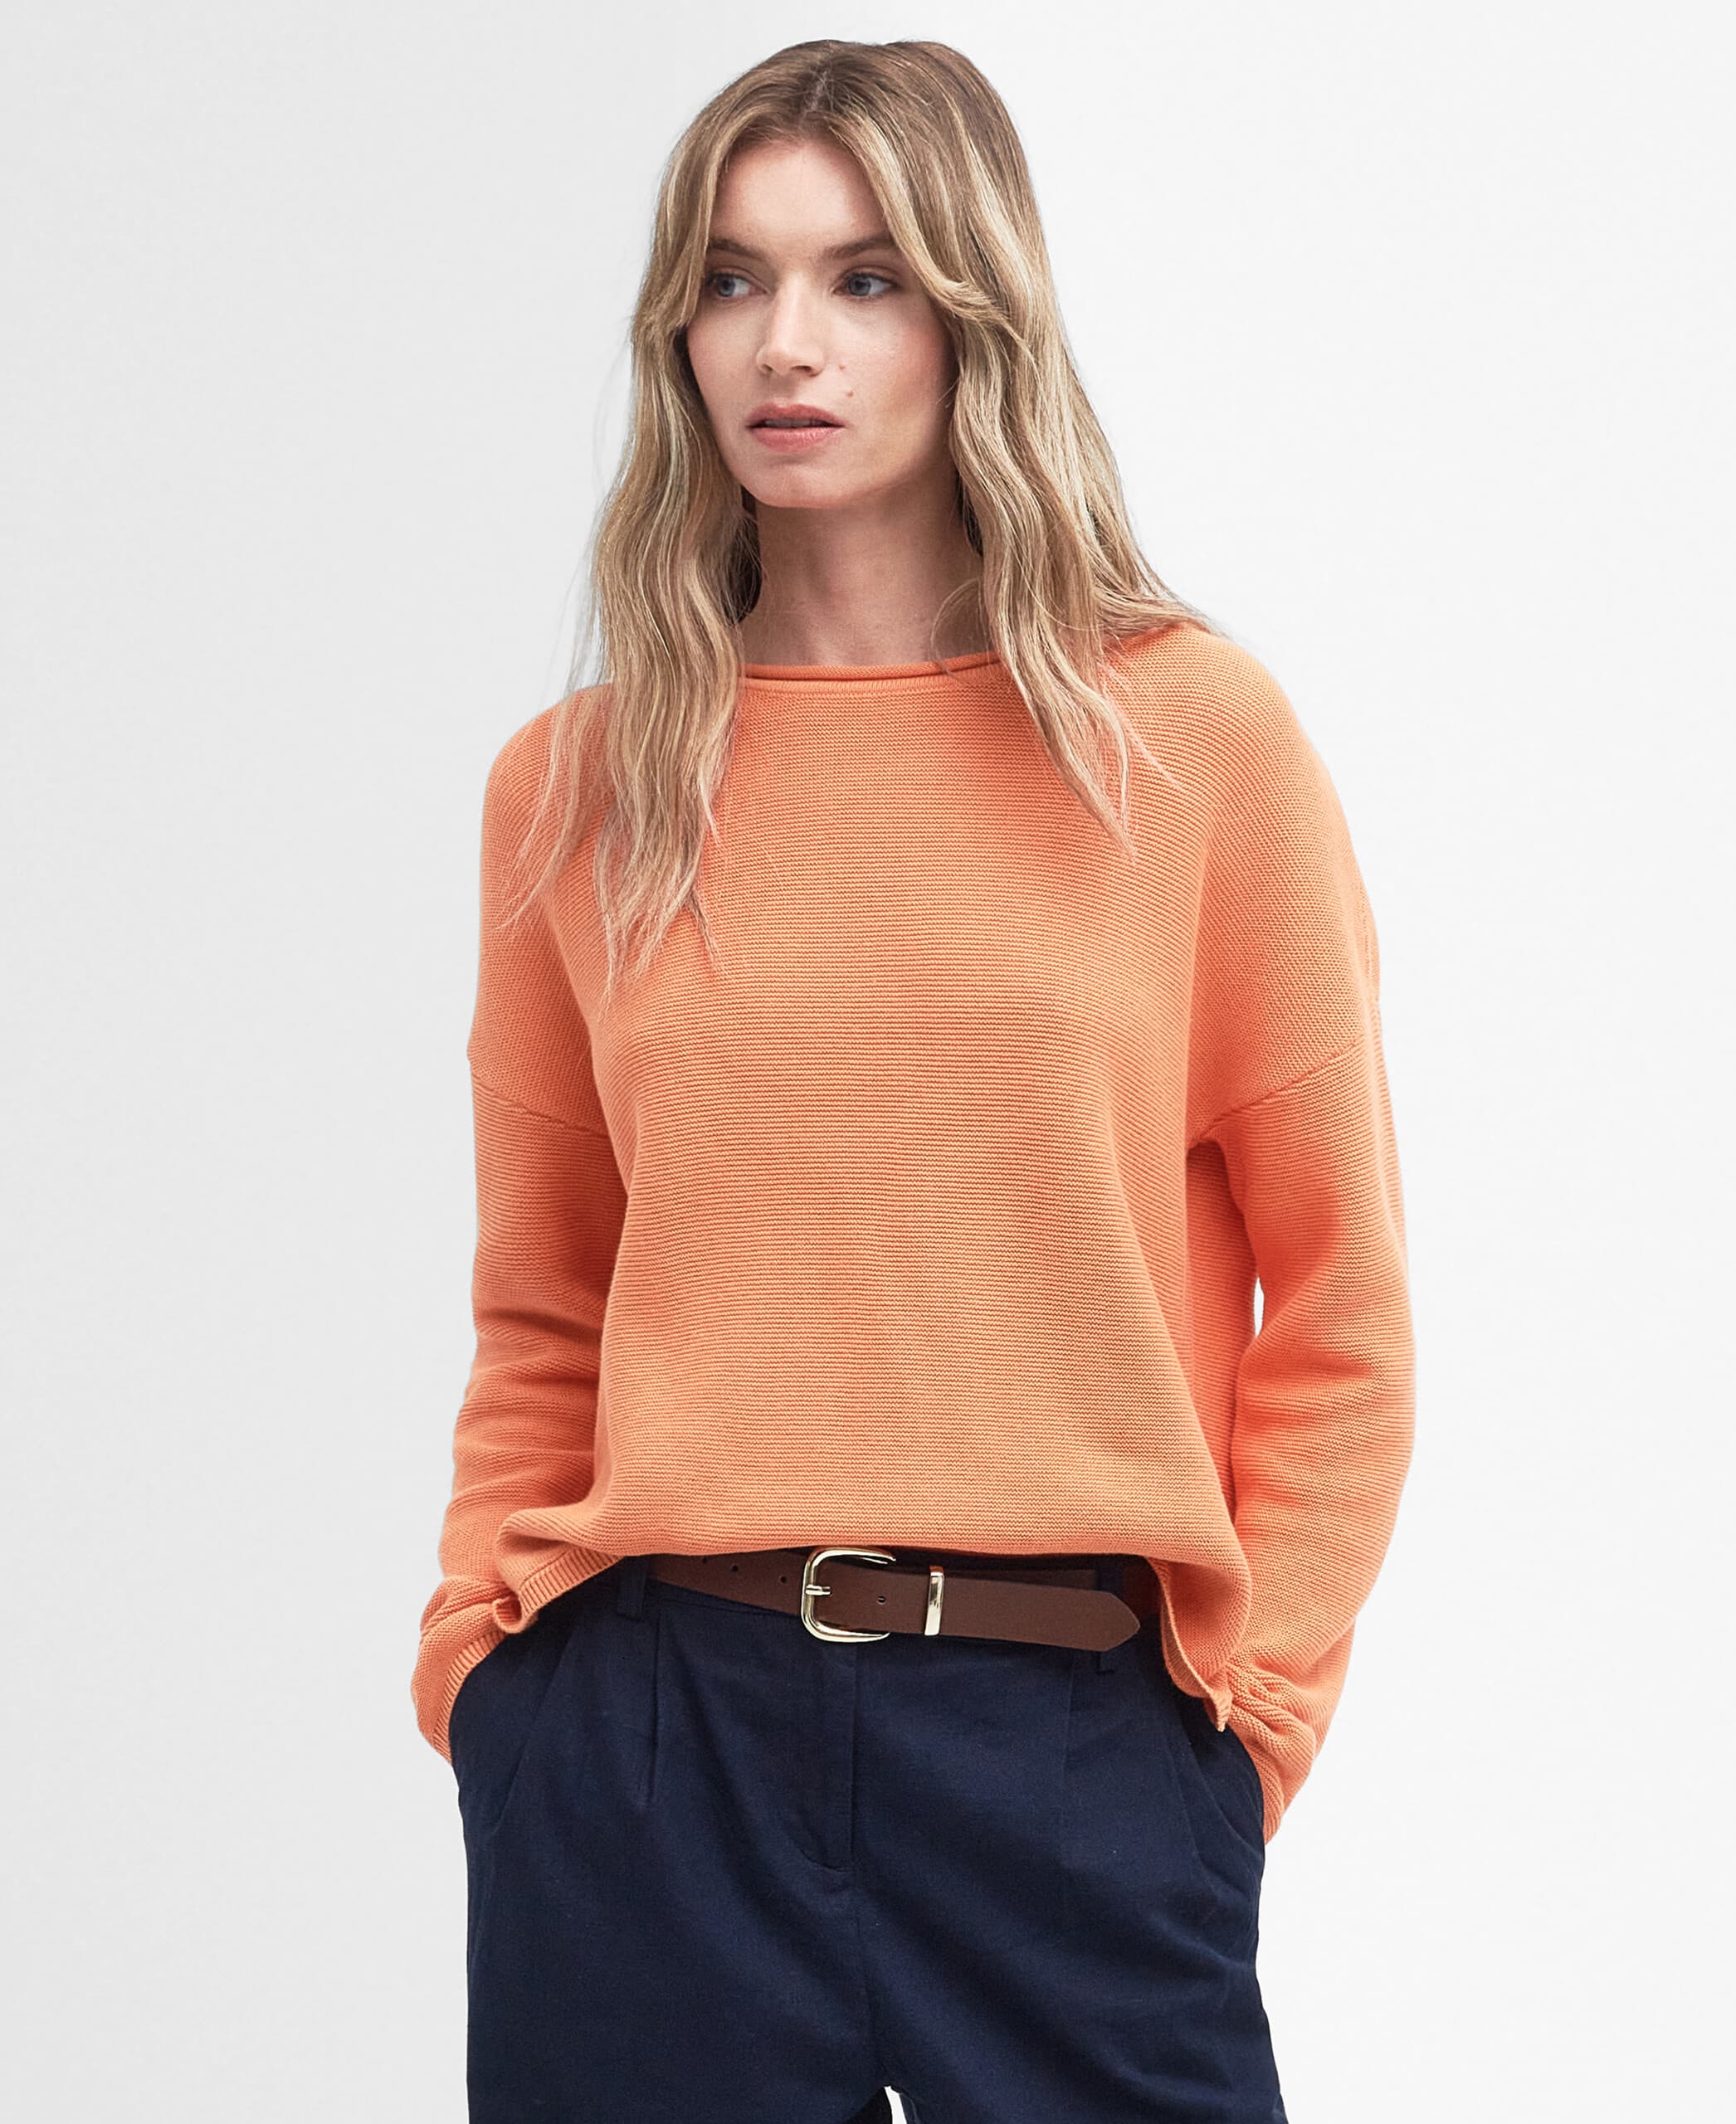 Marine Knitted Jumper – Apricot